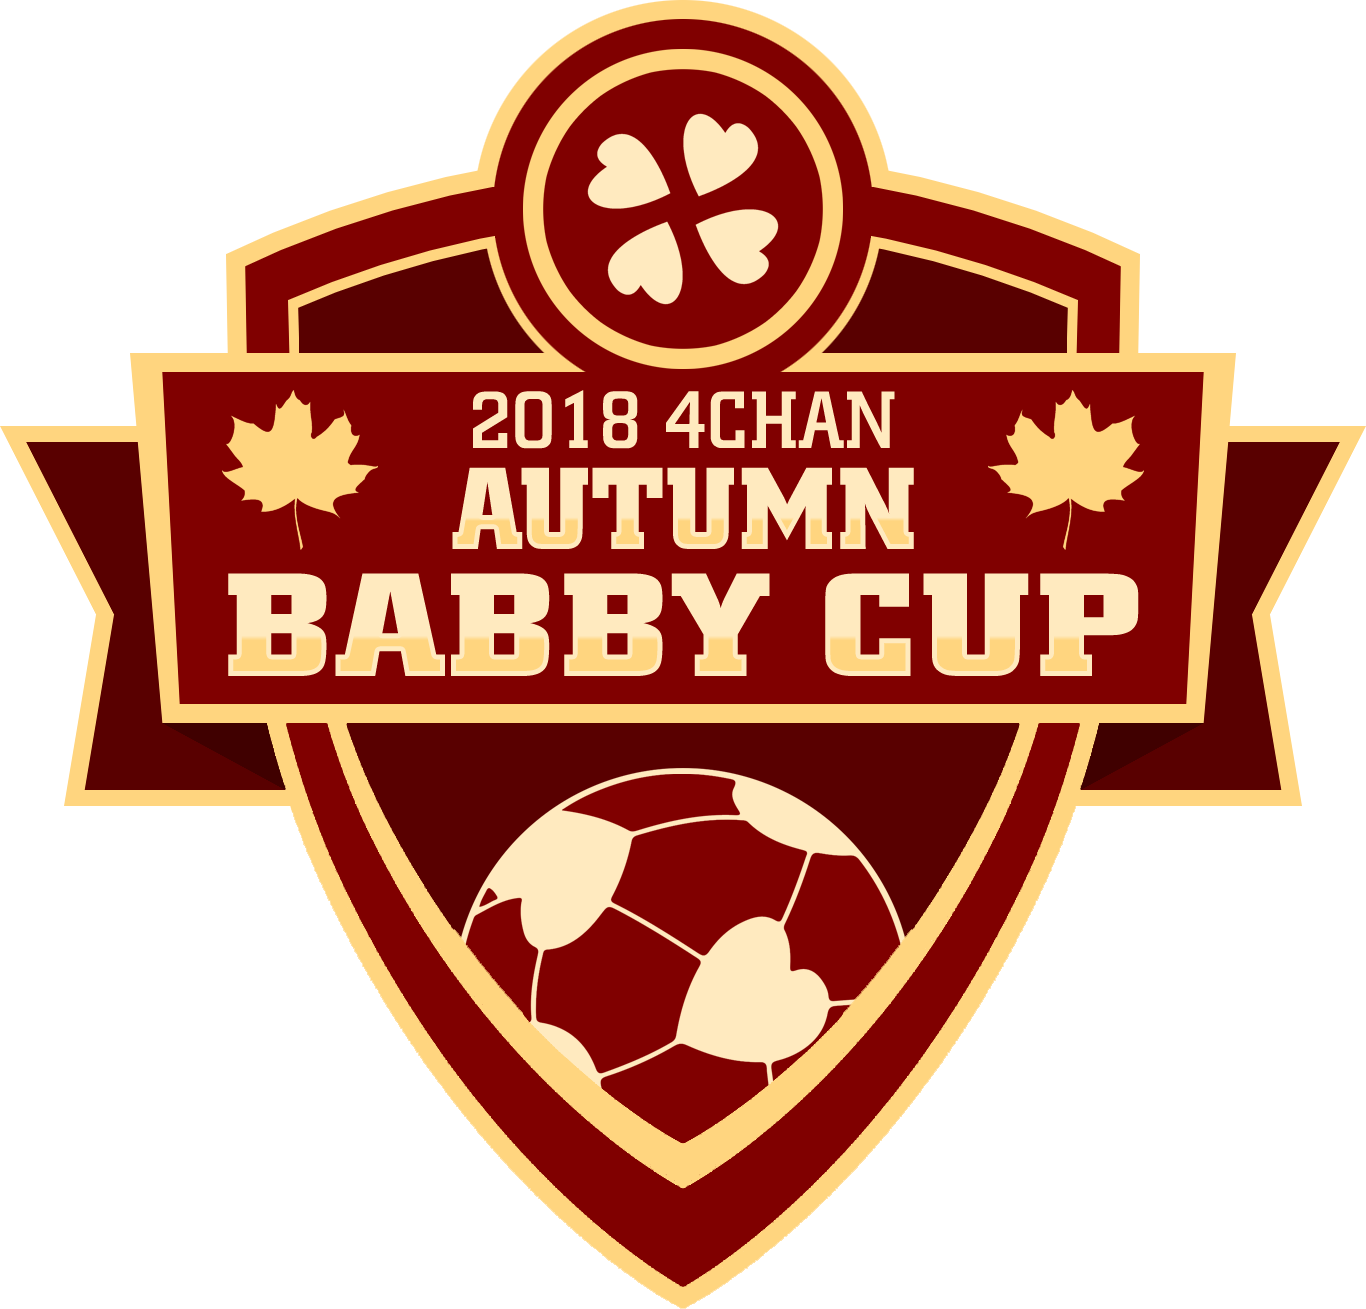 2018 4chan Autumn Babby Cup